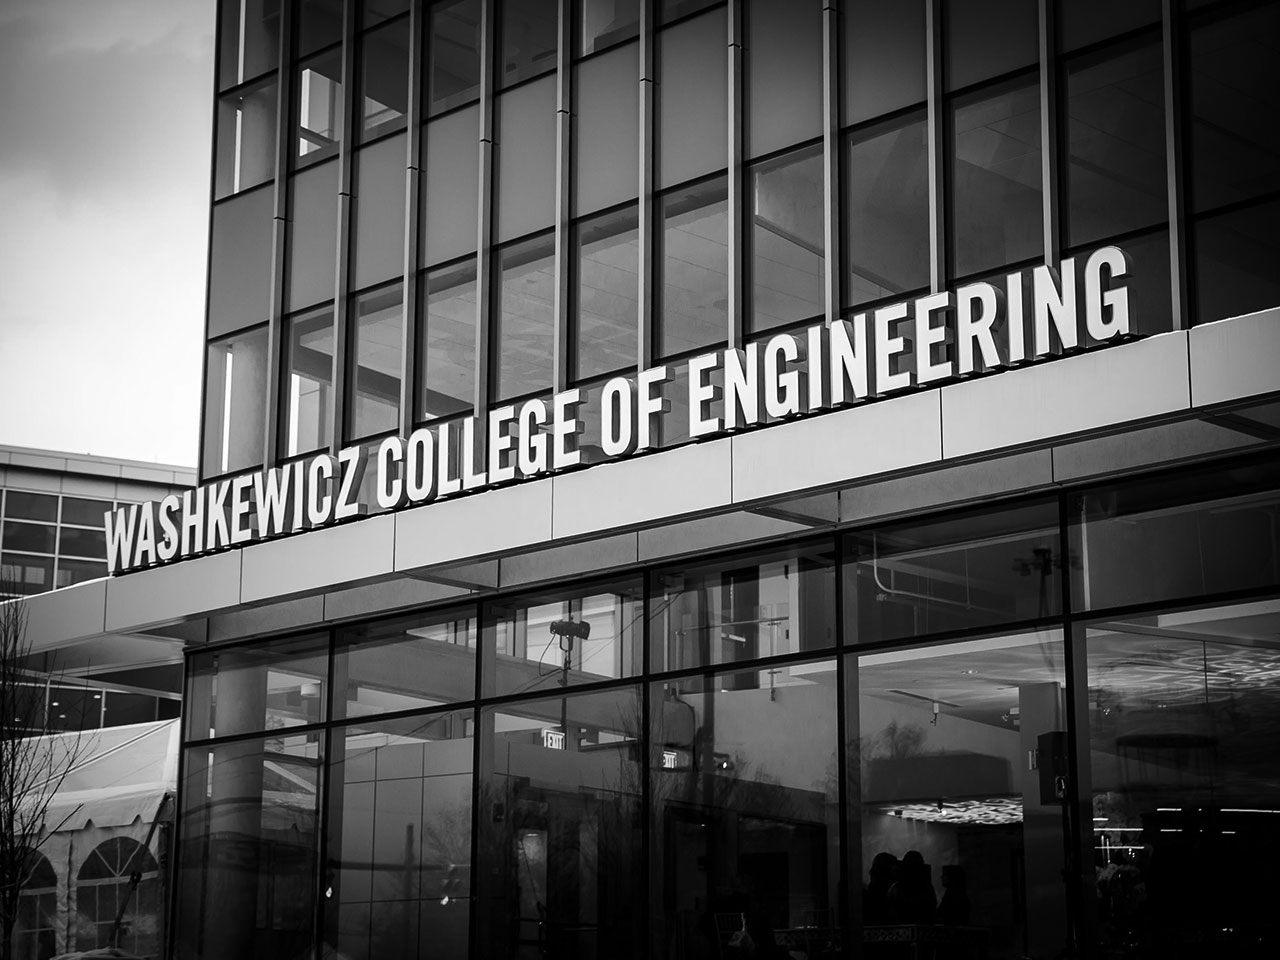 The exterior of Donald E. Washkewicz Hall and the Washkewicz College of Engineering